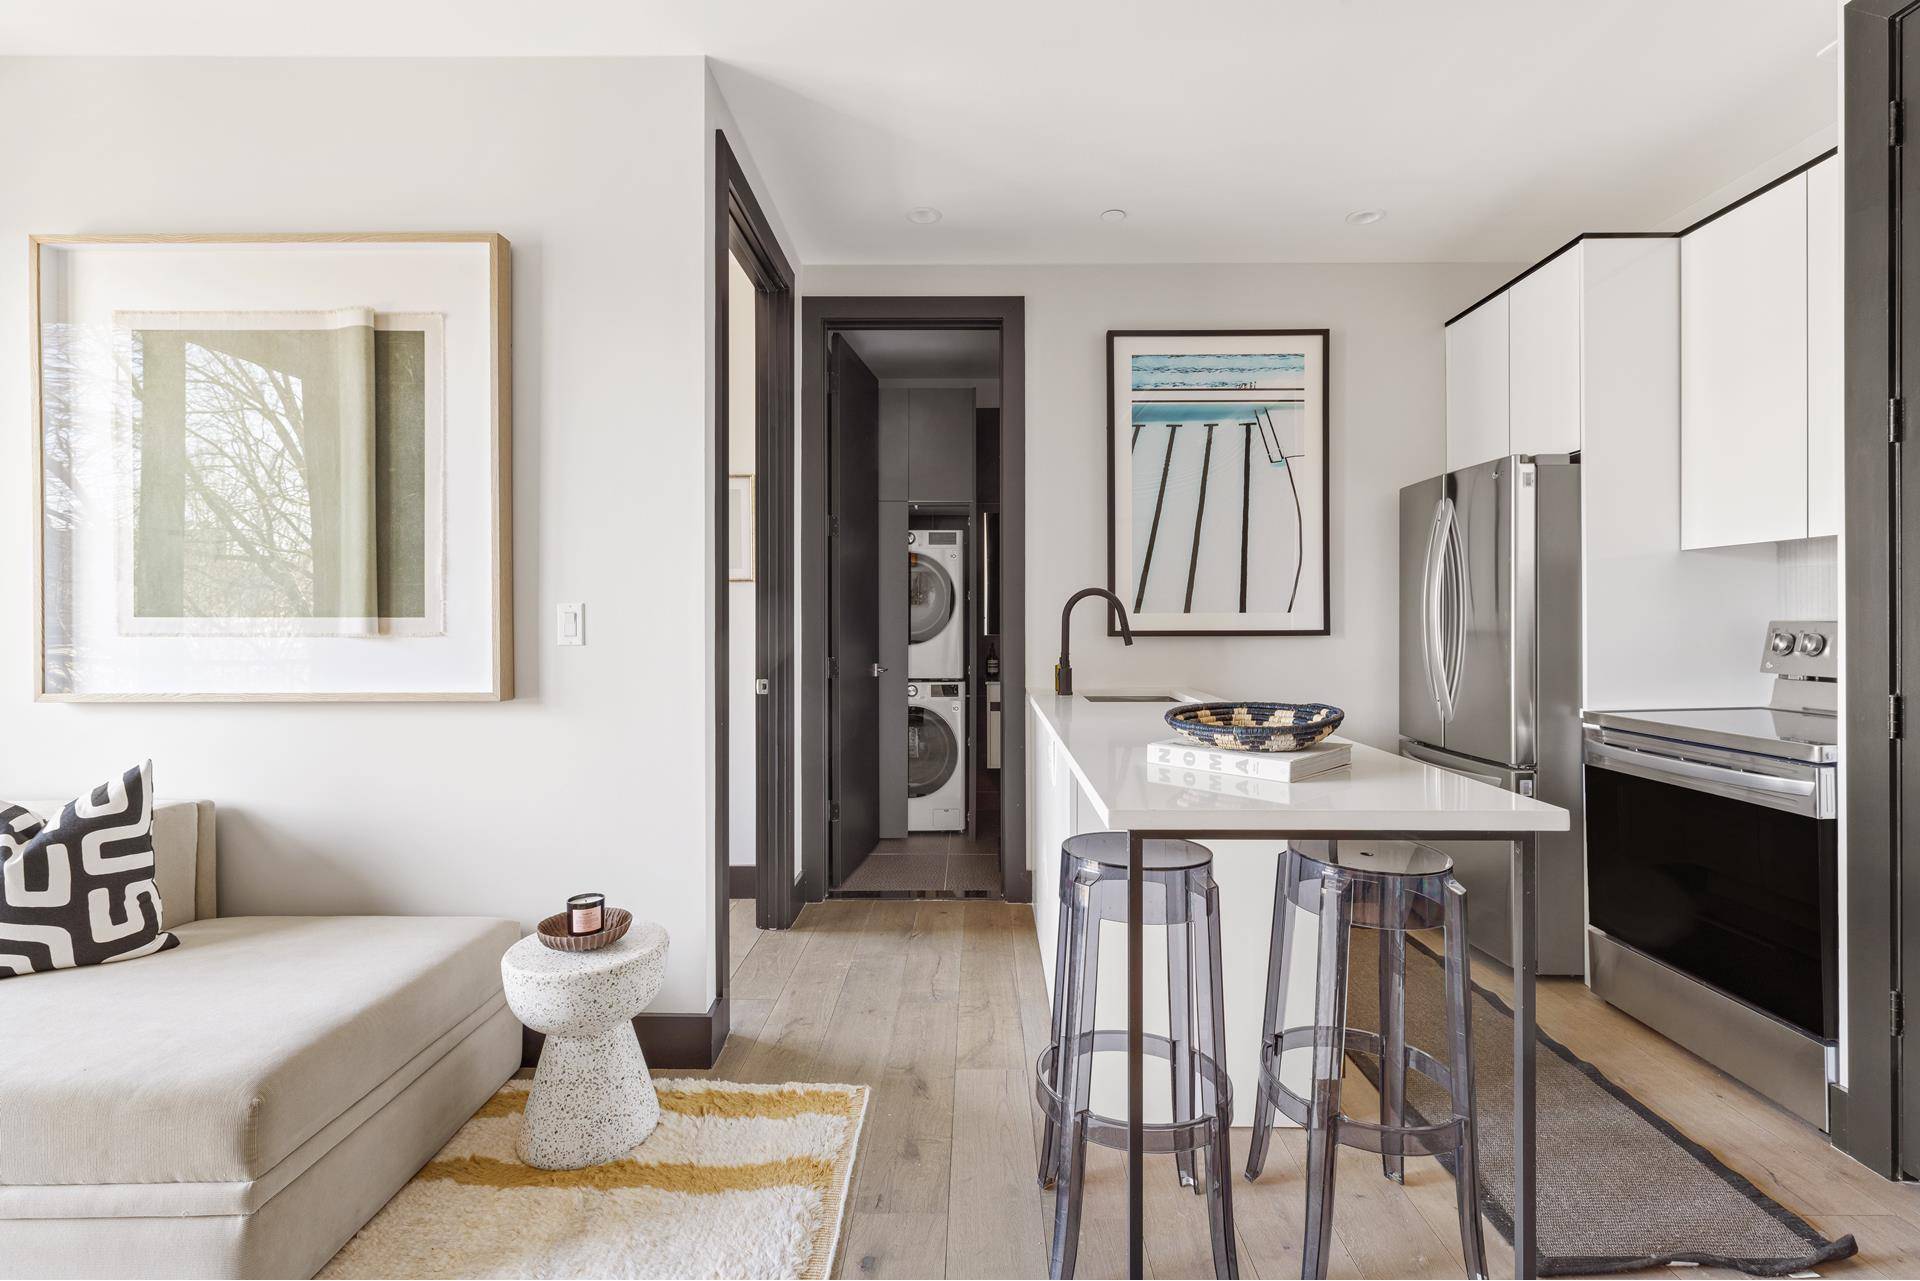 Located in one of the city's most diverse neighborhoods, 785 E 34th introduces 13 highly crafted condominium residences ranging from simplex one bedroom to duplex three bedrooms, a majority of ...